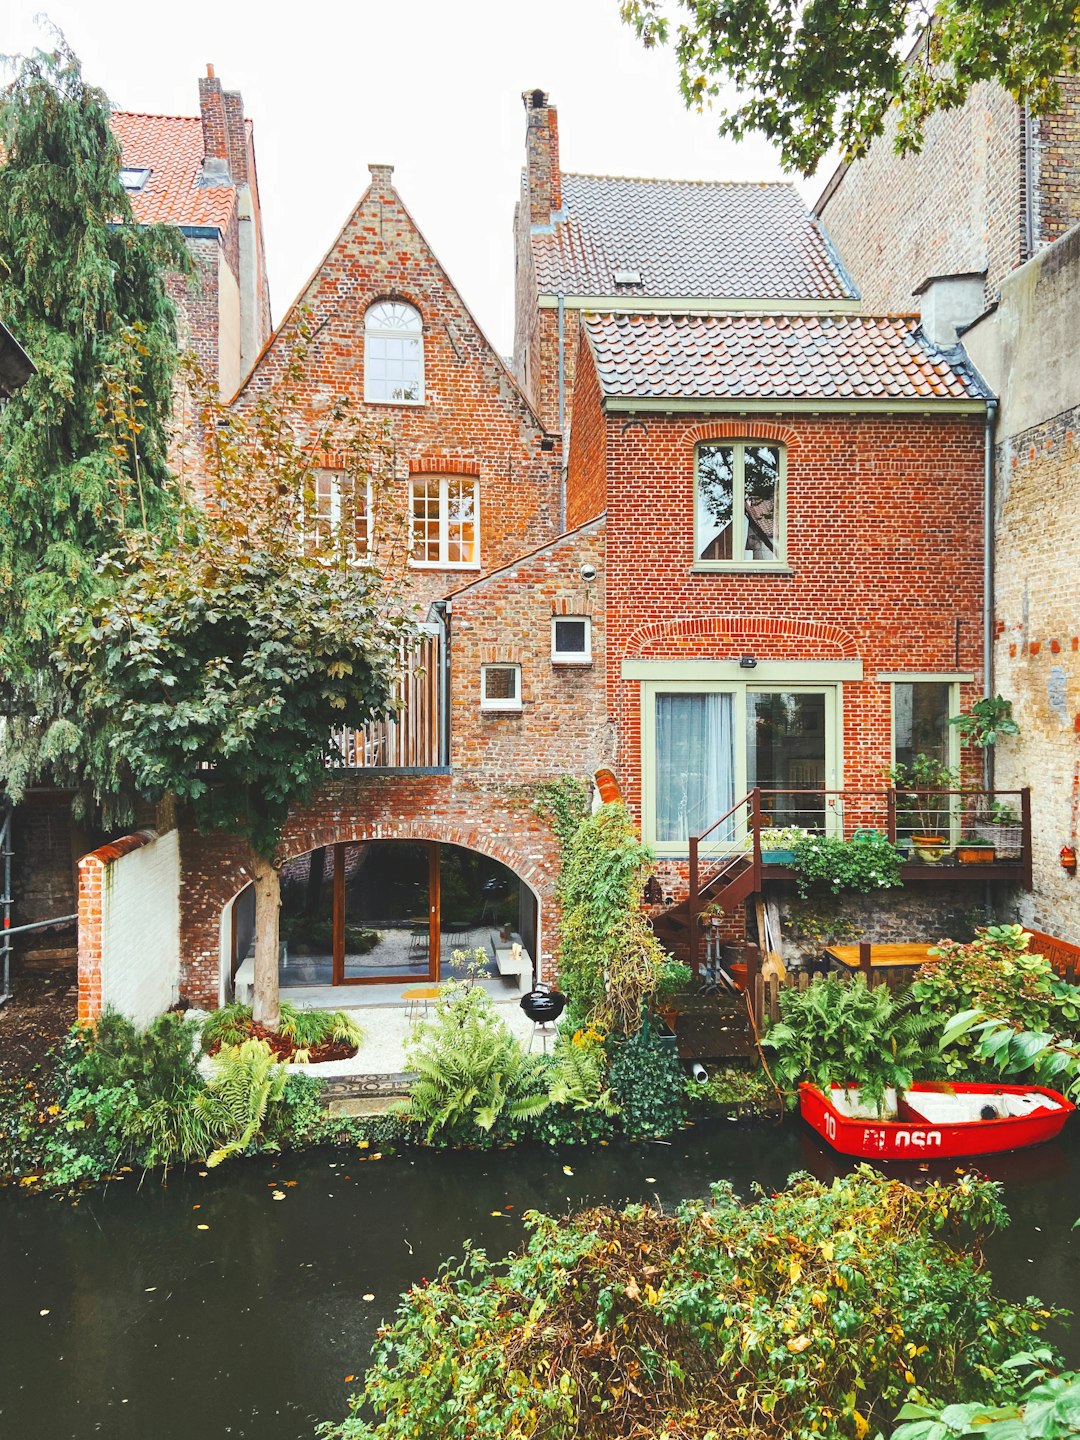 Travel Tips and Stories of Bruges in Belgium